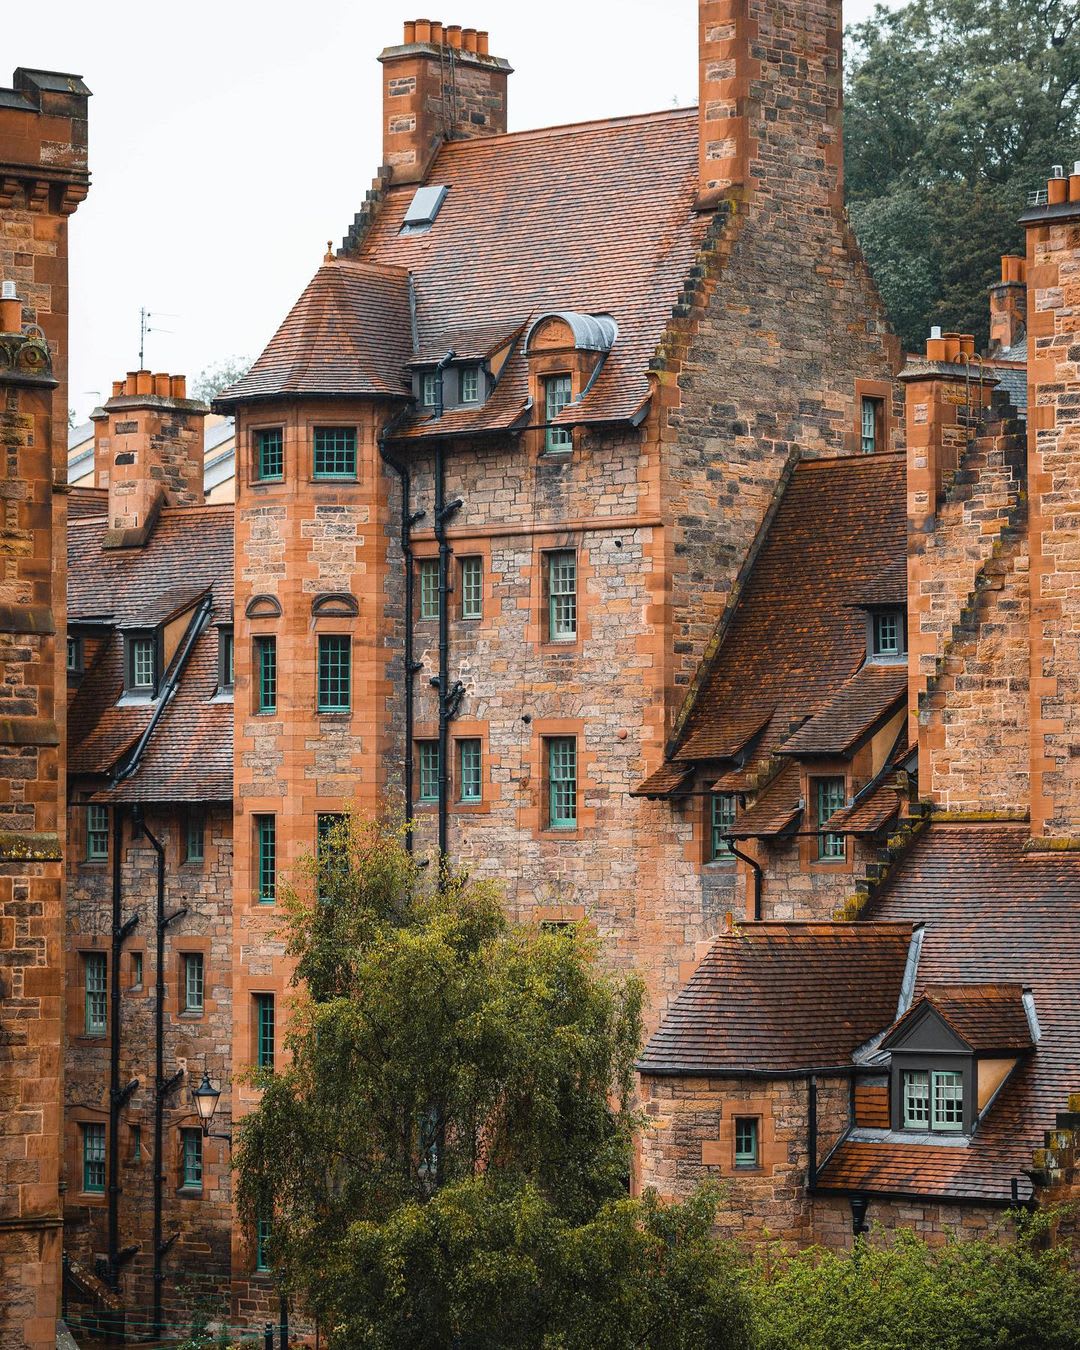 Well Court, designed as model housing for local workers and finished in 1886 in Dean Village, Edinburgh, Scotland.